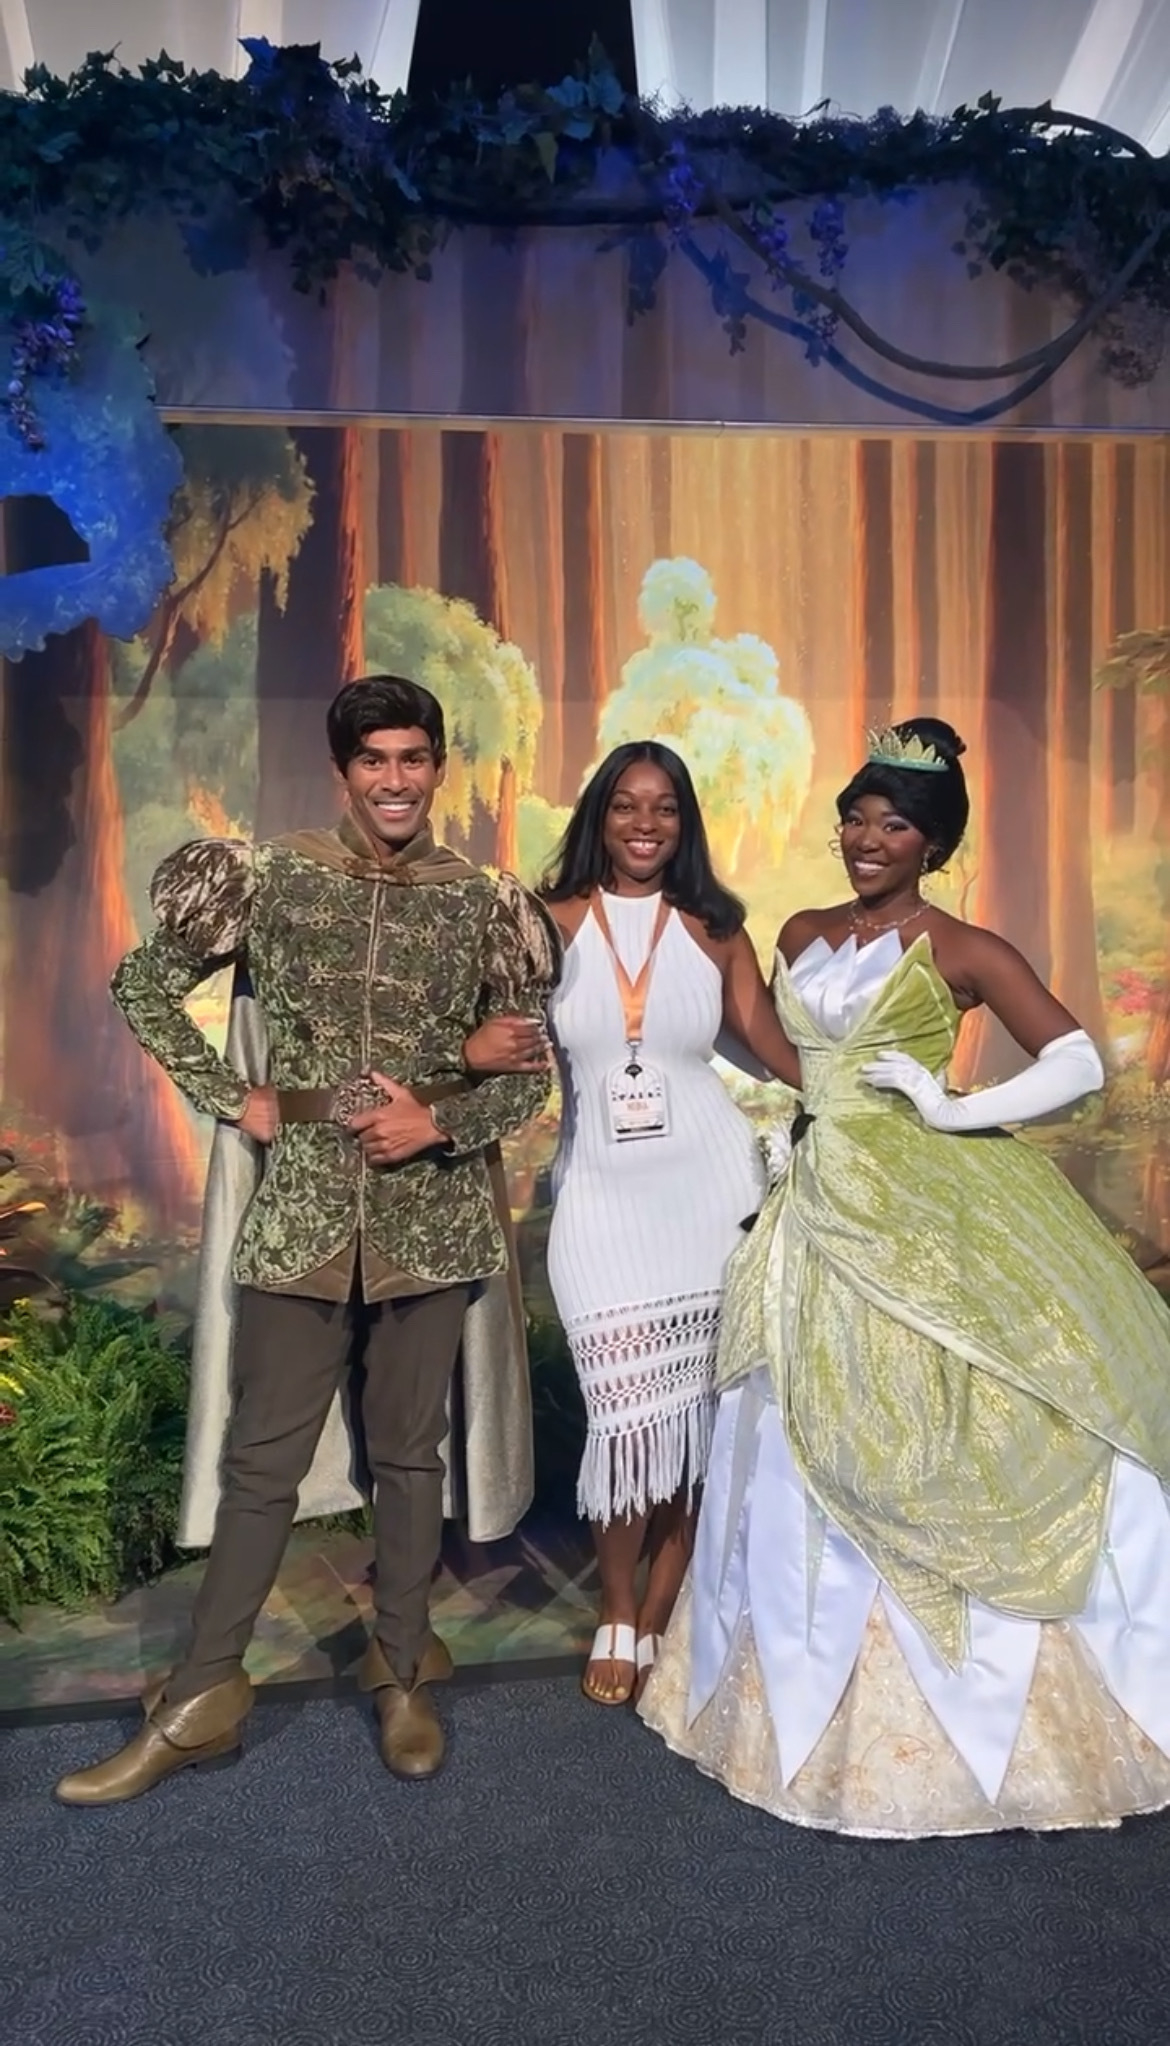 Two people dressed as Prince Naveen and Princess Tiana pose with a smiling guest at a themed event